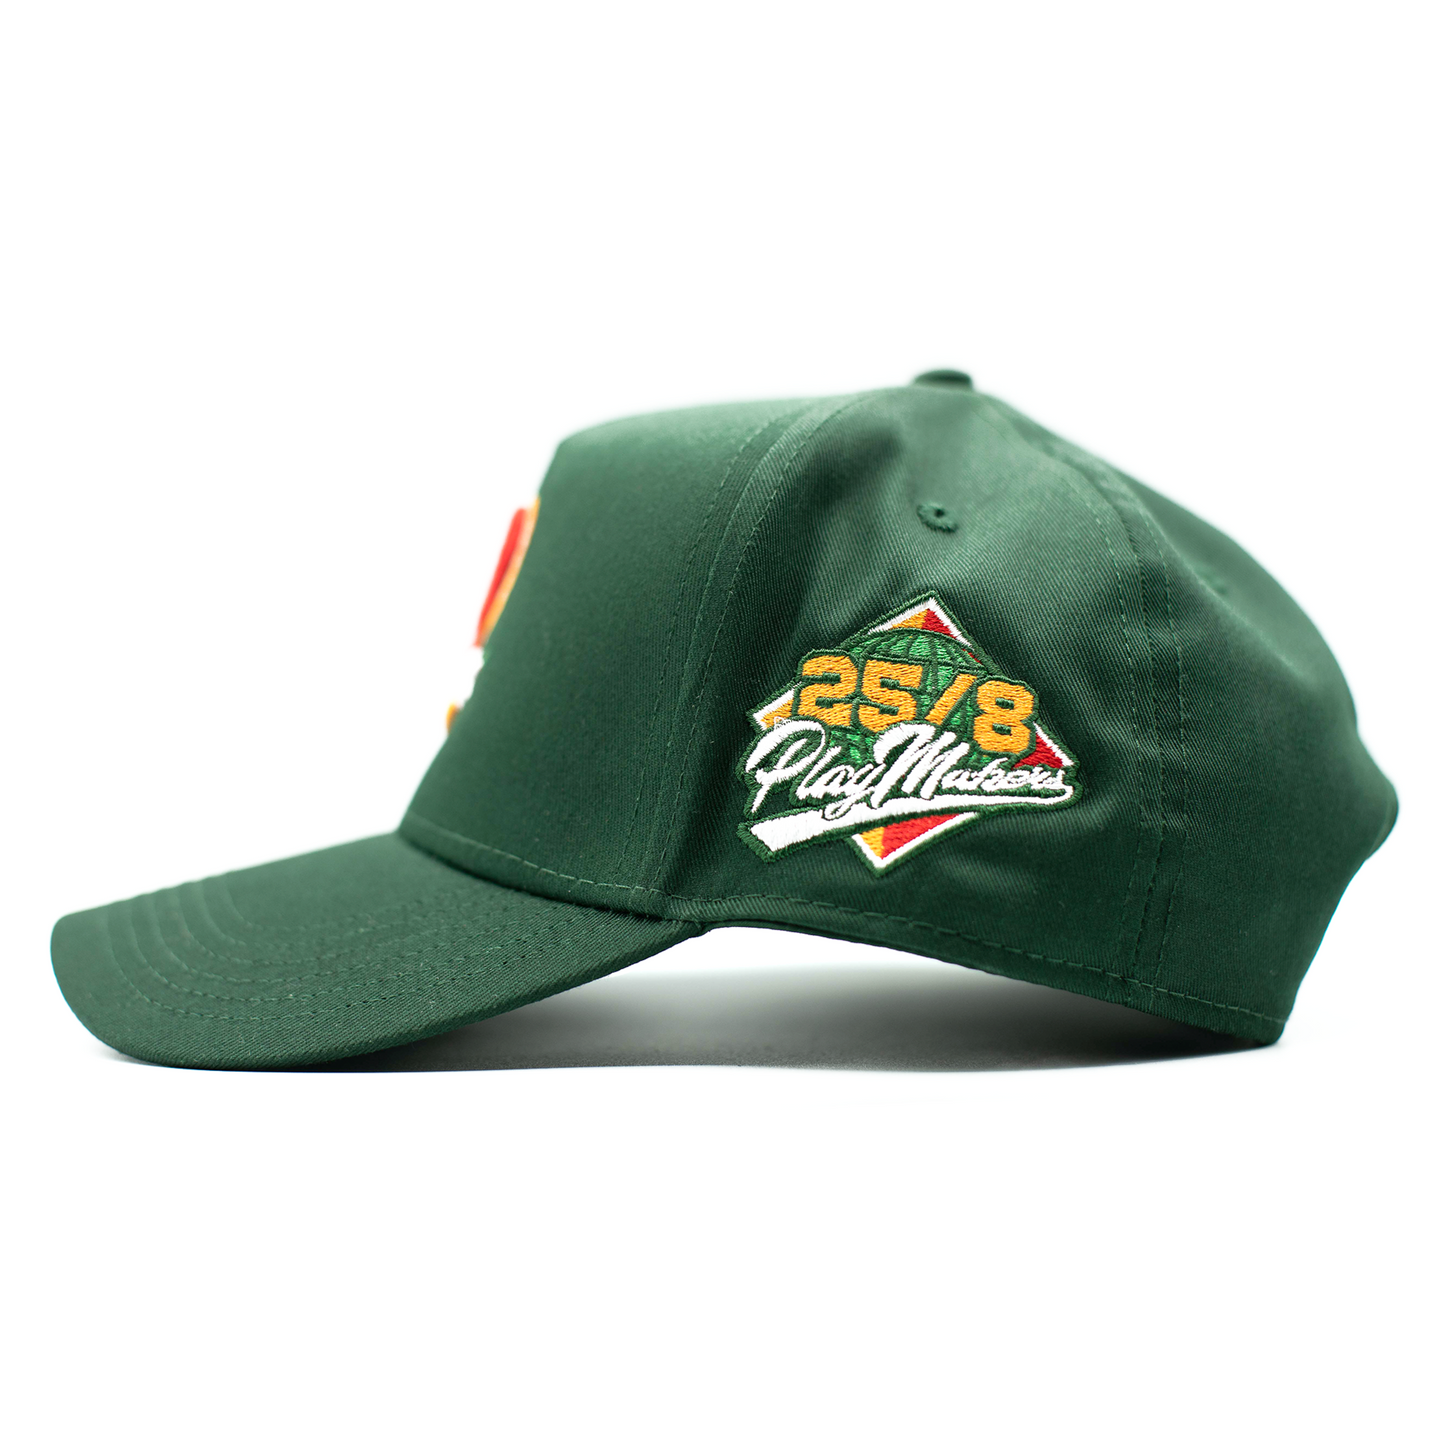 Forrest Green Playmakers 25/8 Snapback